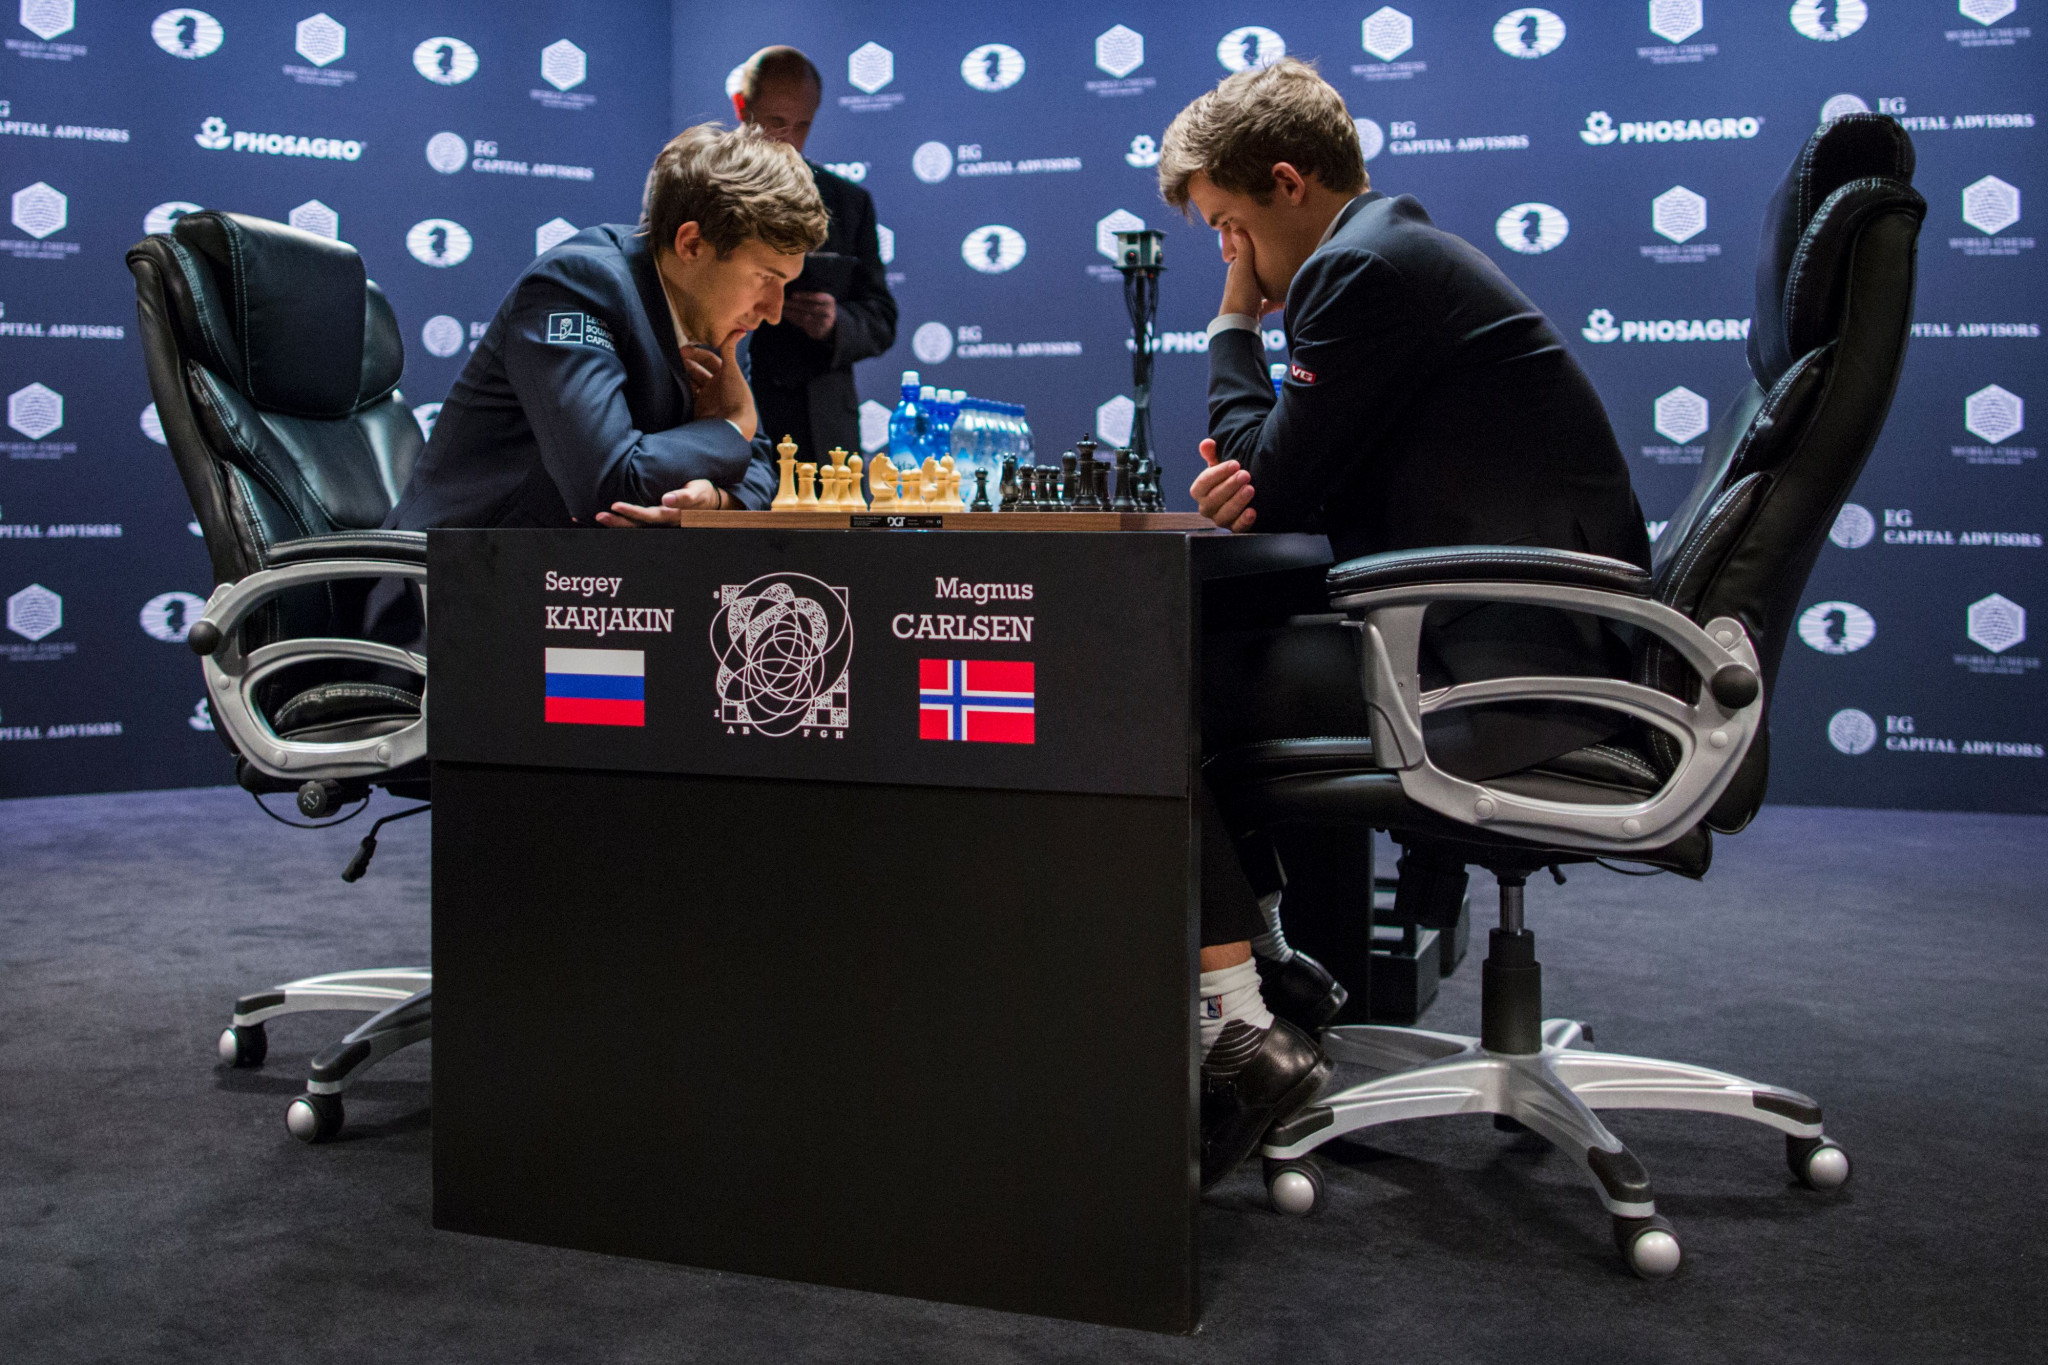 Explained: Why did FIDE ban GM Karjakin over comments on Ukraine